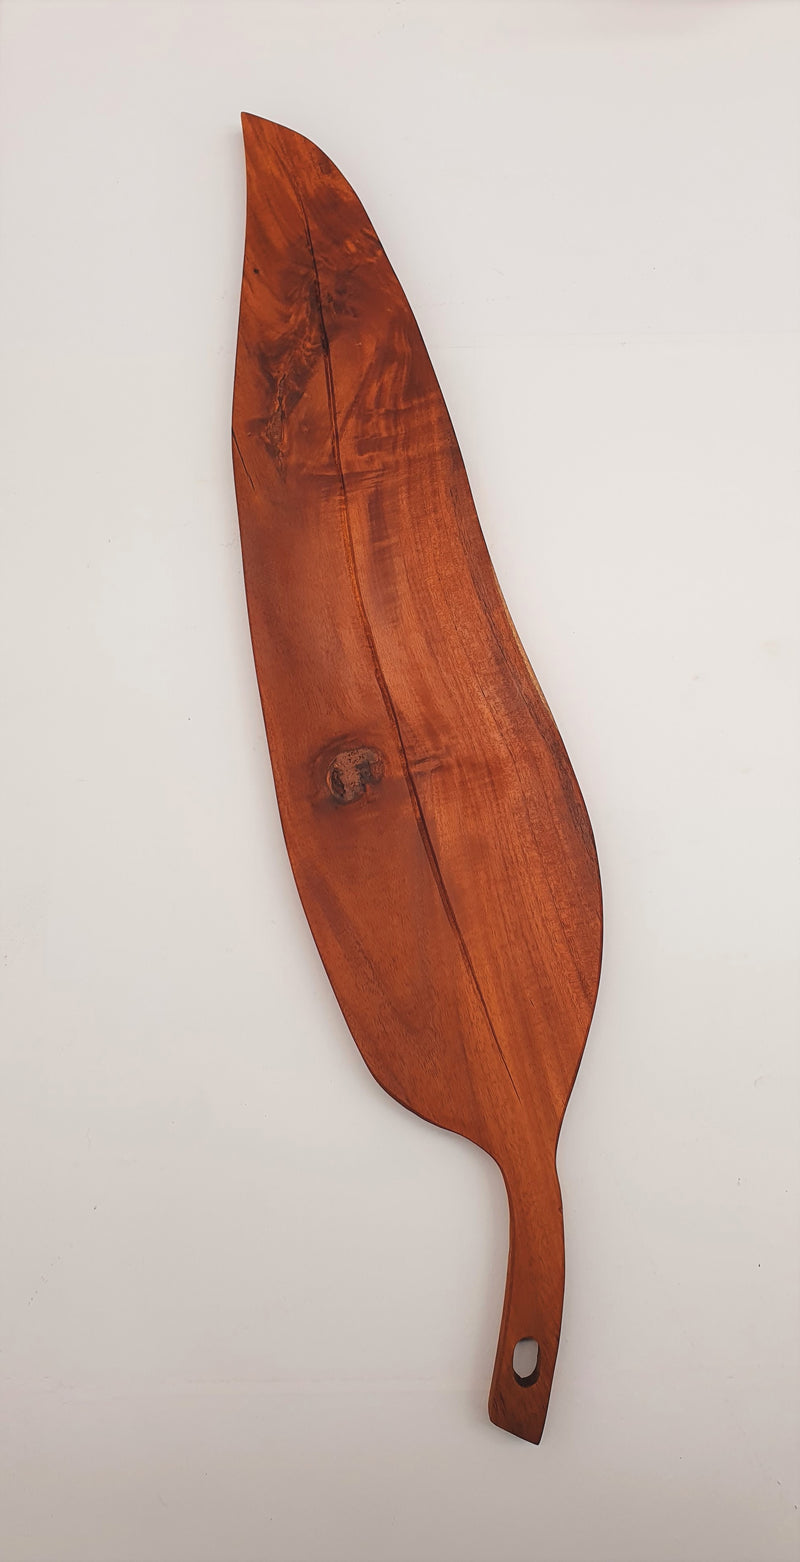 Large Australian Gum Leaf Serving Platter / Hand Carved Wooden Tray / Wood Serving Platter / Unique Hand Crafted Wood Pieces / Serving Tray.